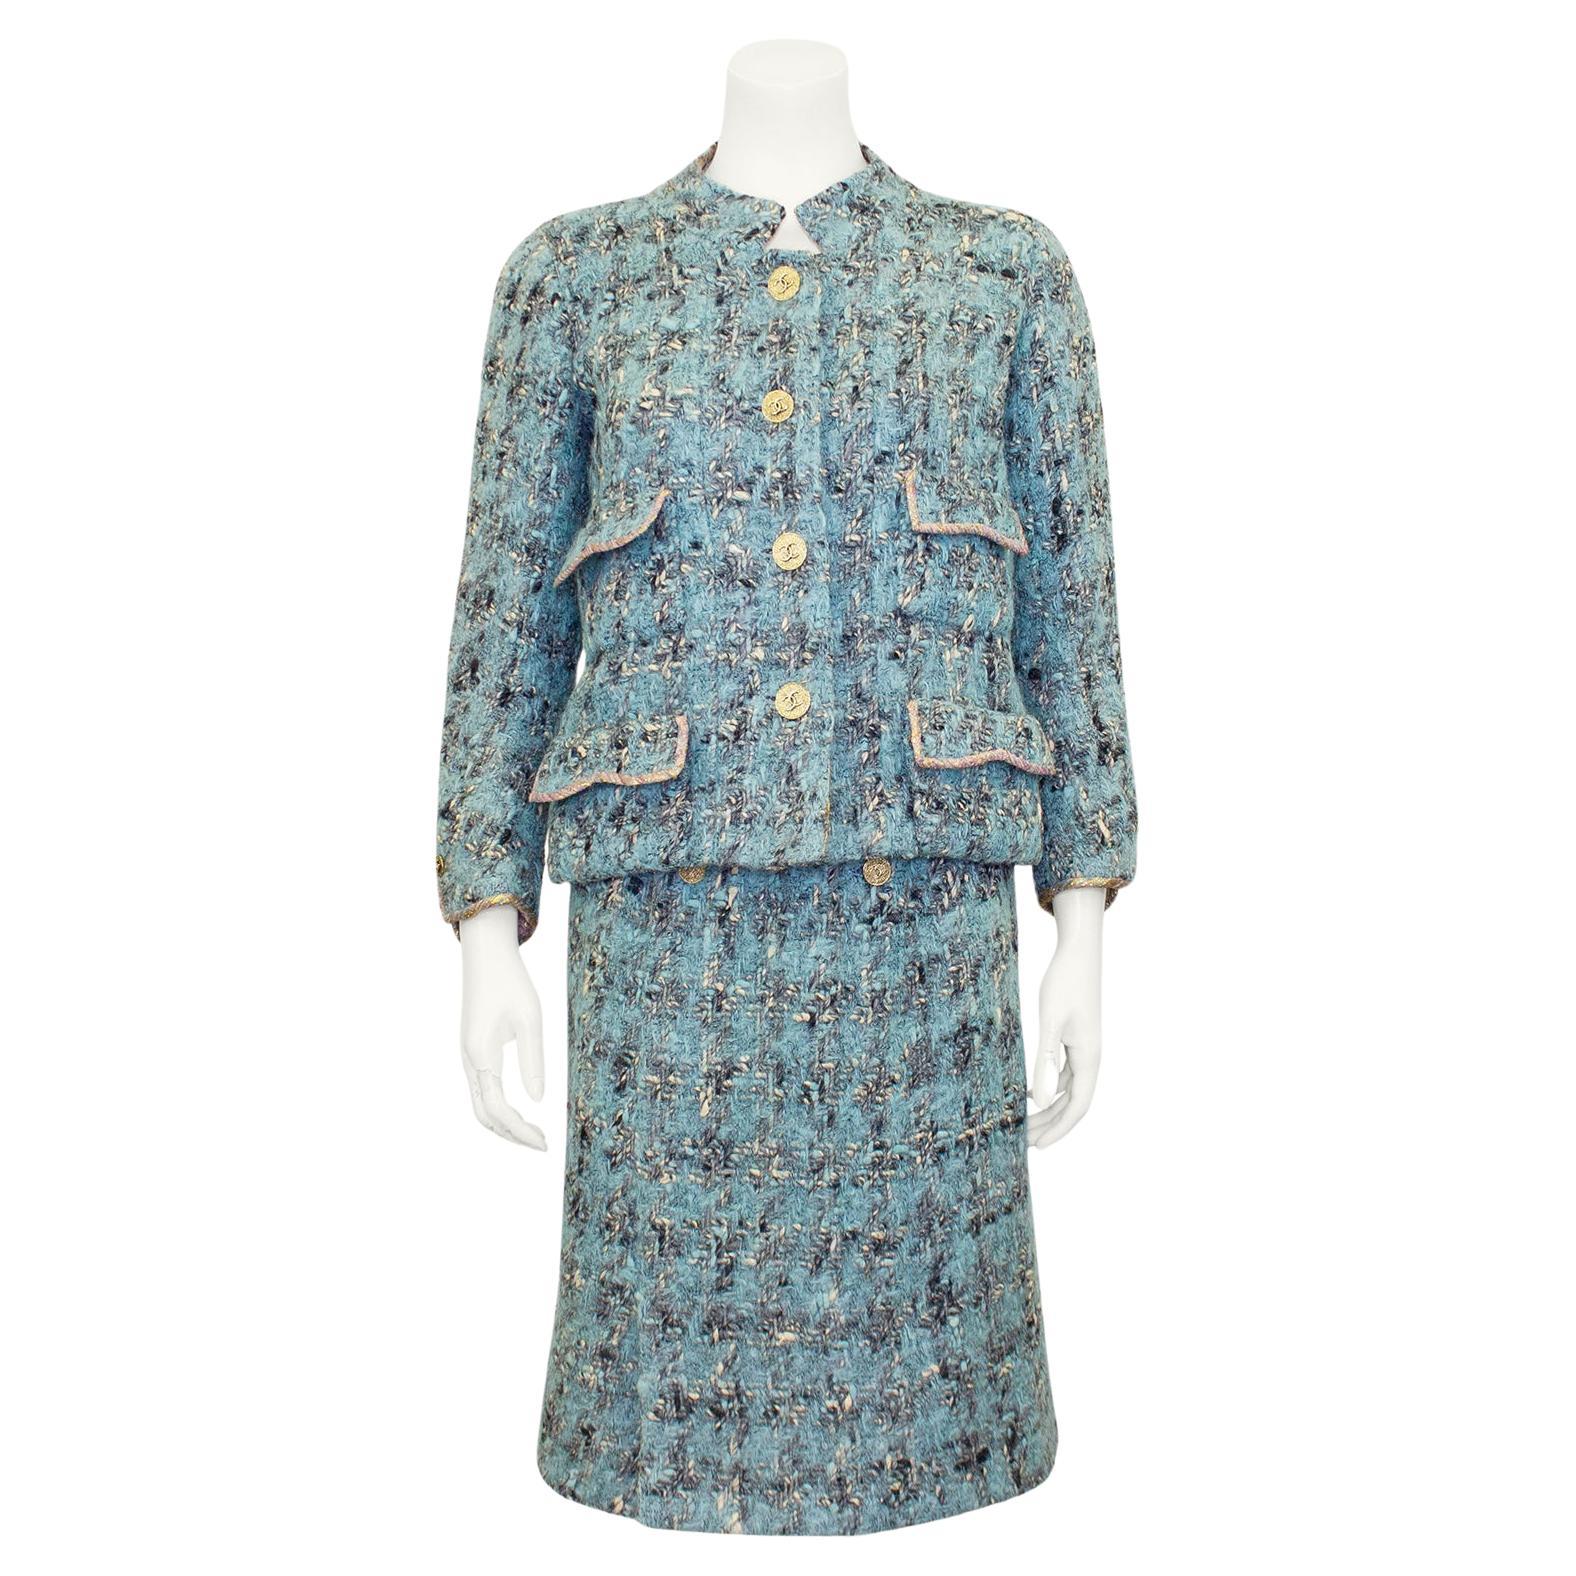 1960's Chanel Haute Couture Blue Tweed Jacket and Dress Ensemble 